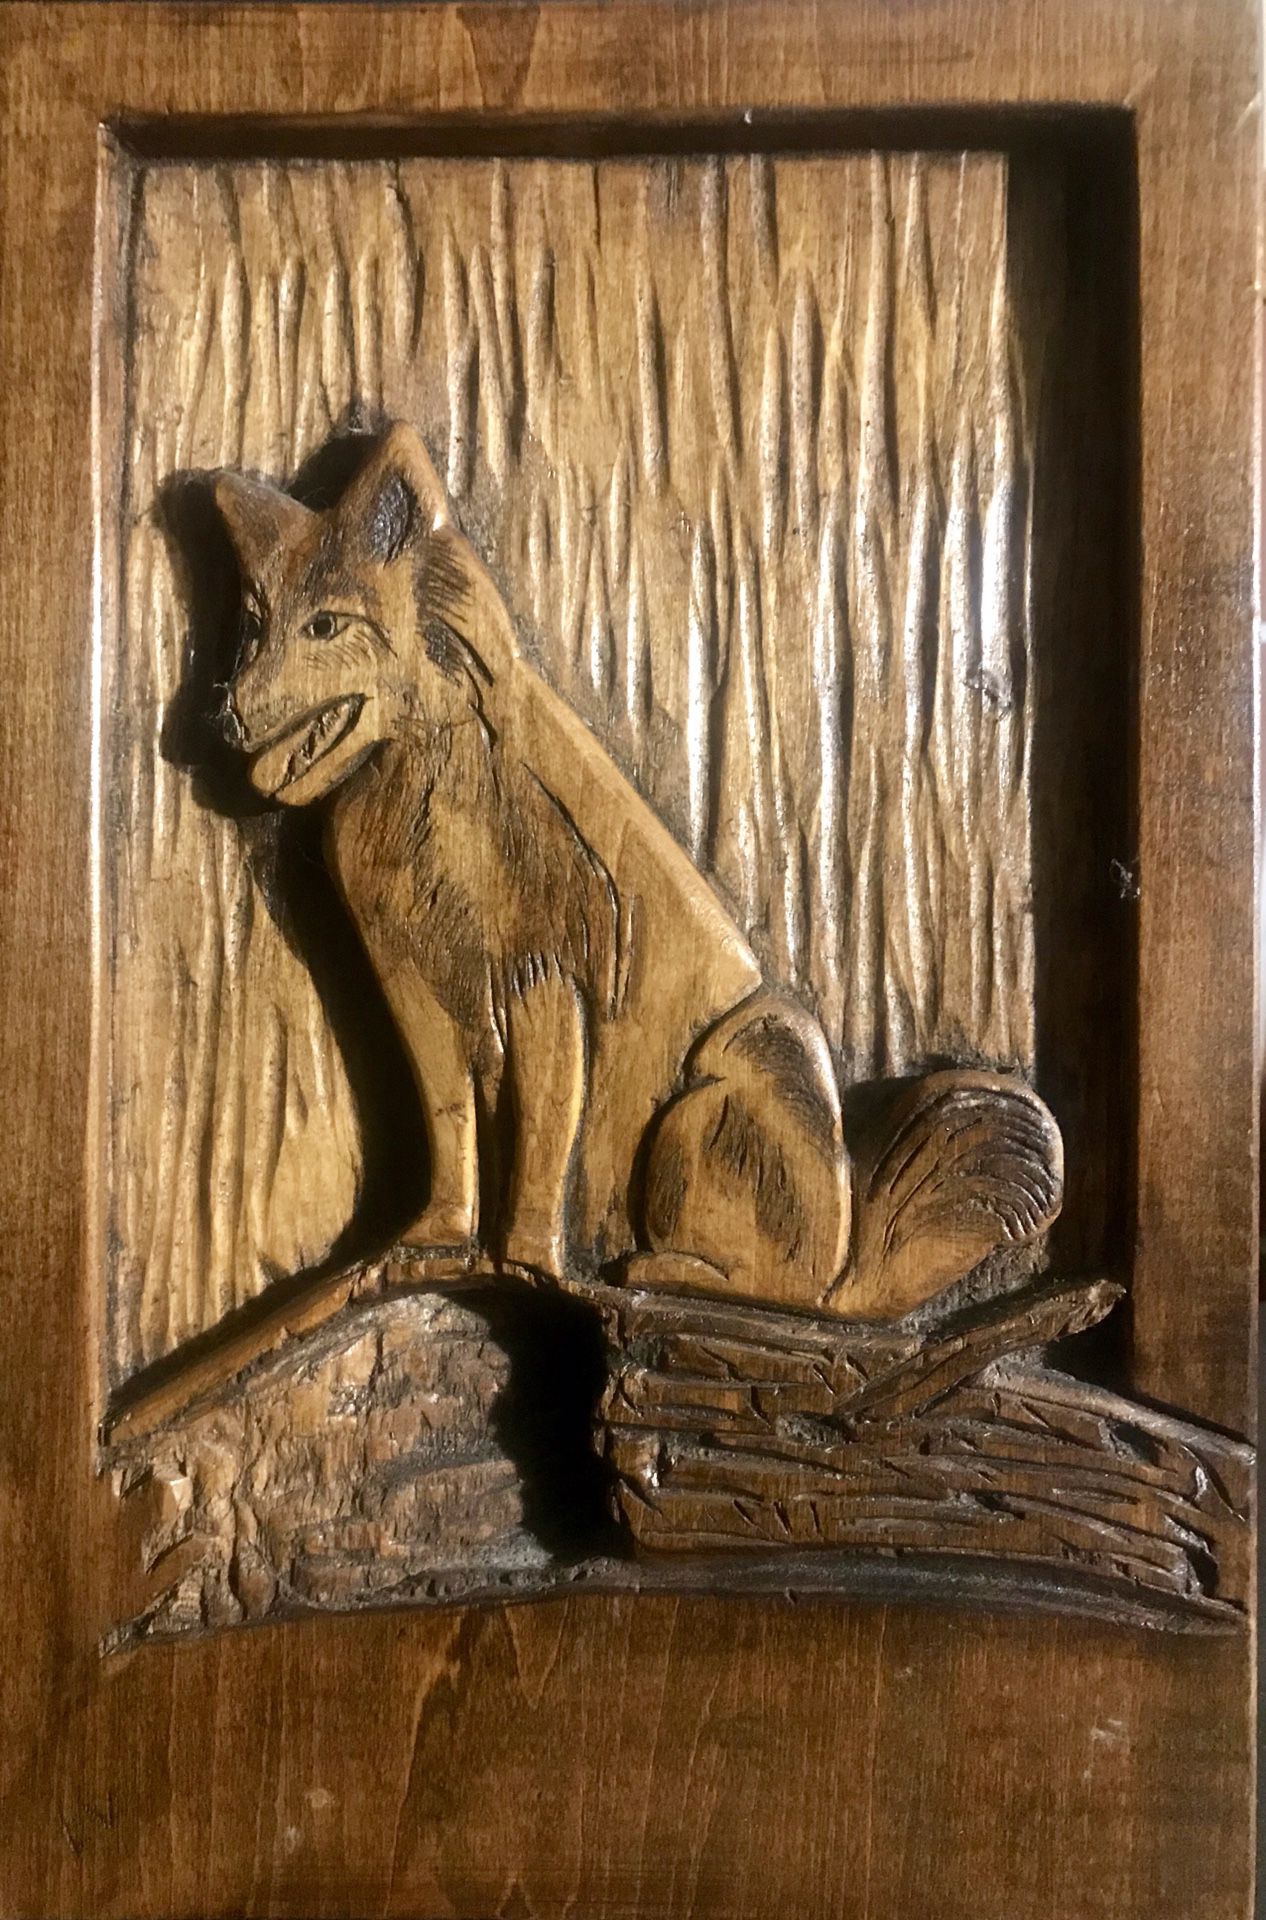 WOOD CARVING OF COYOTE